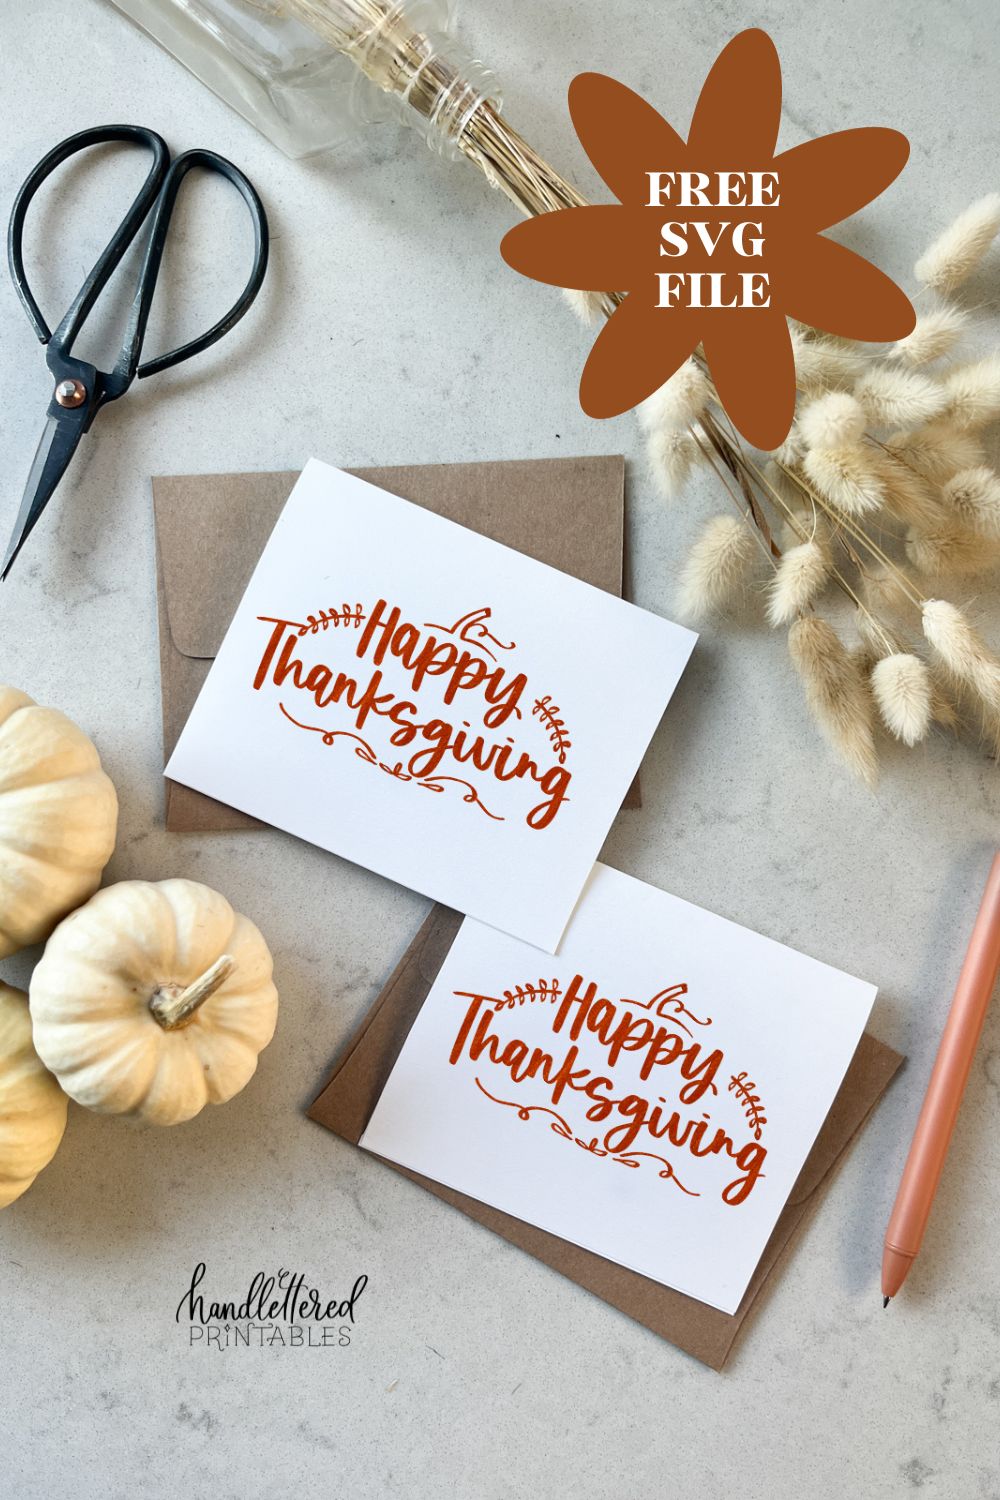 Happy Thanksgiving free cut file for cricut crafting (shown on cards with orange cardstock overlay)